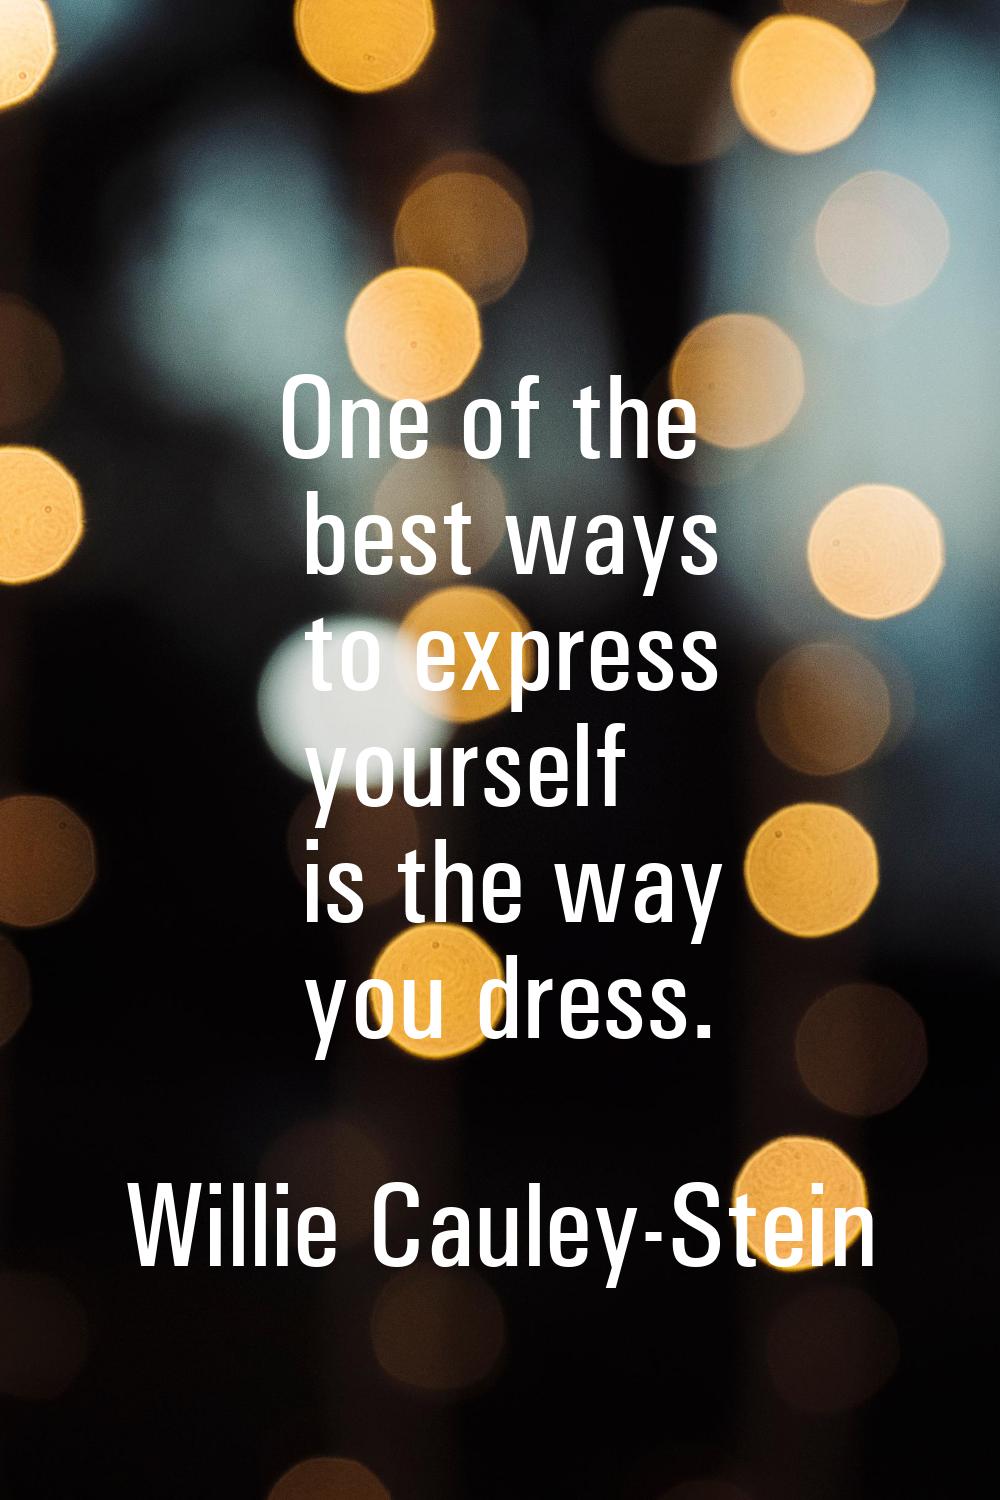 One of the best ways to express yourself is the way you dress.